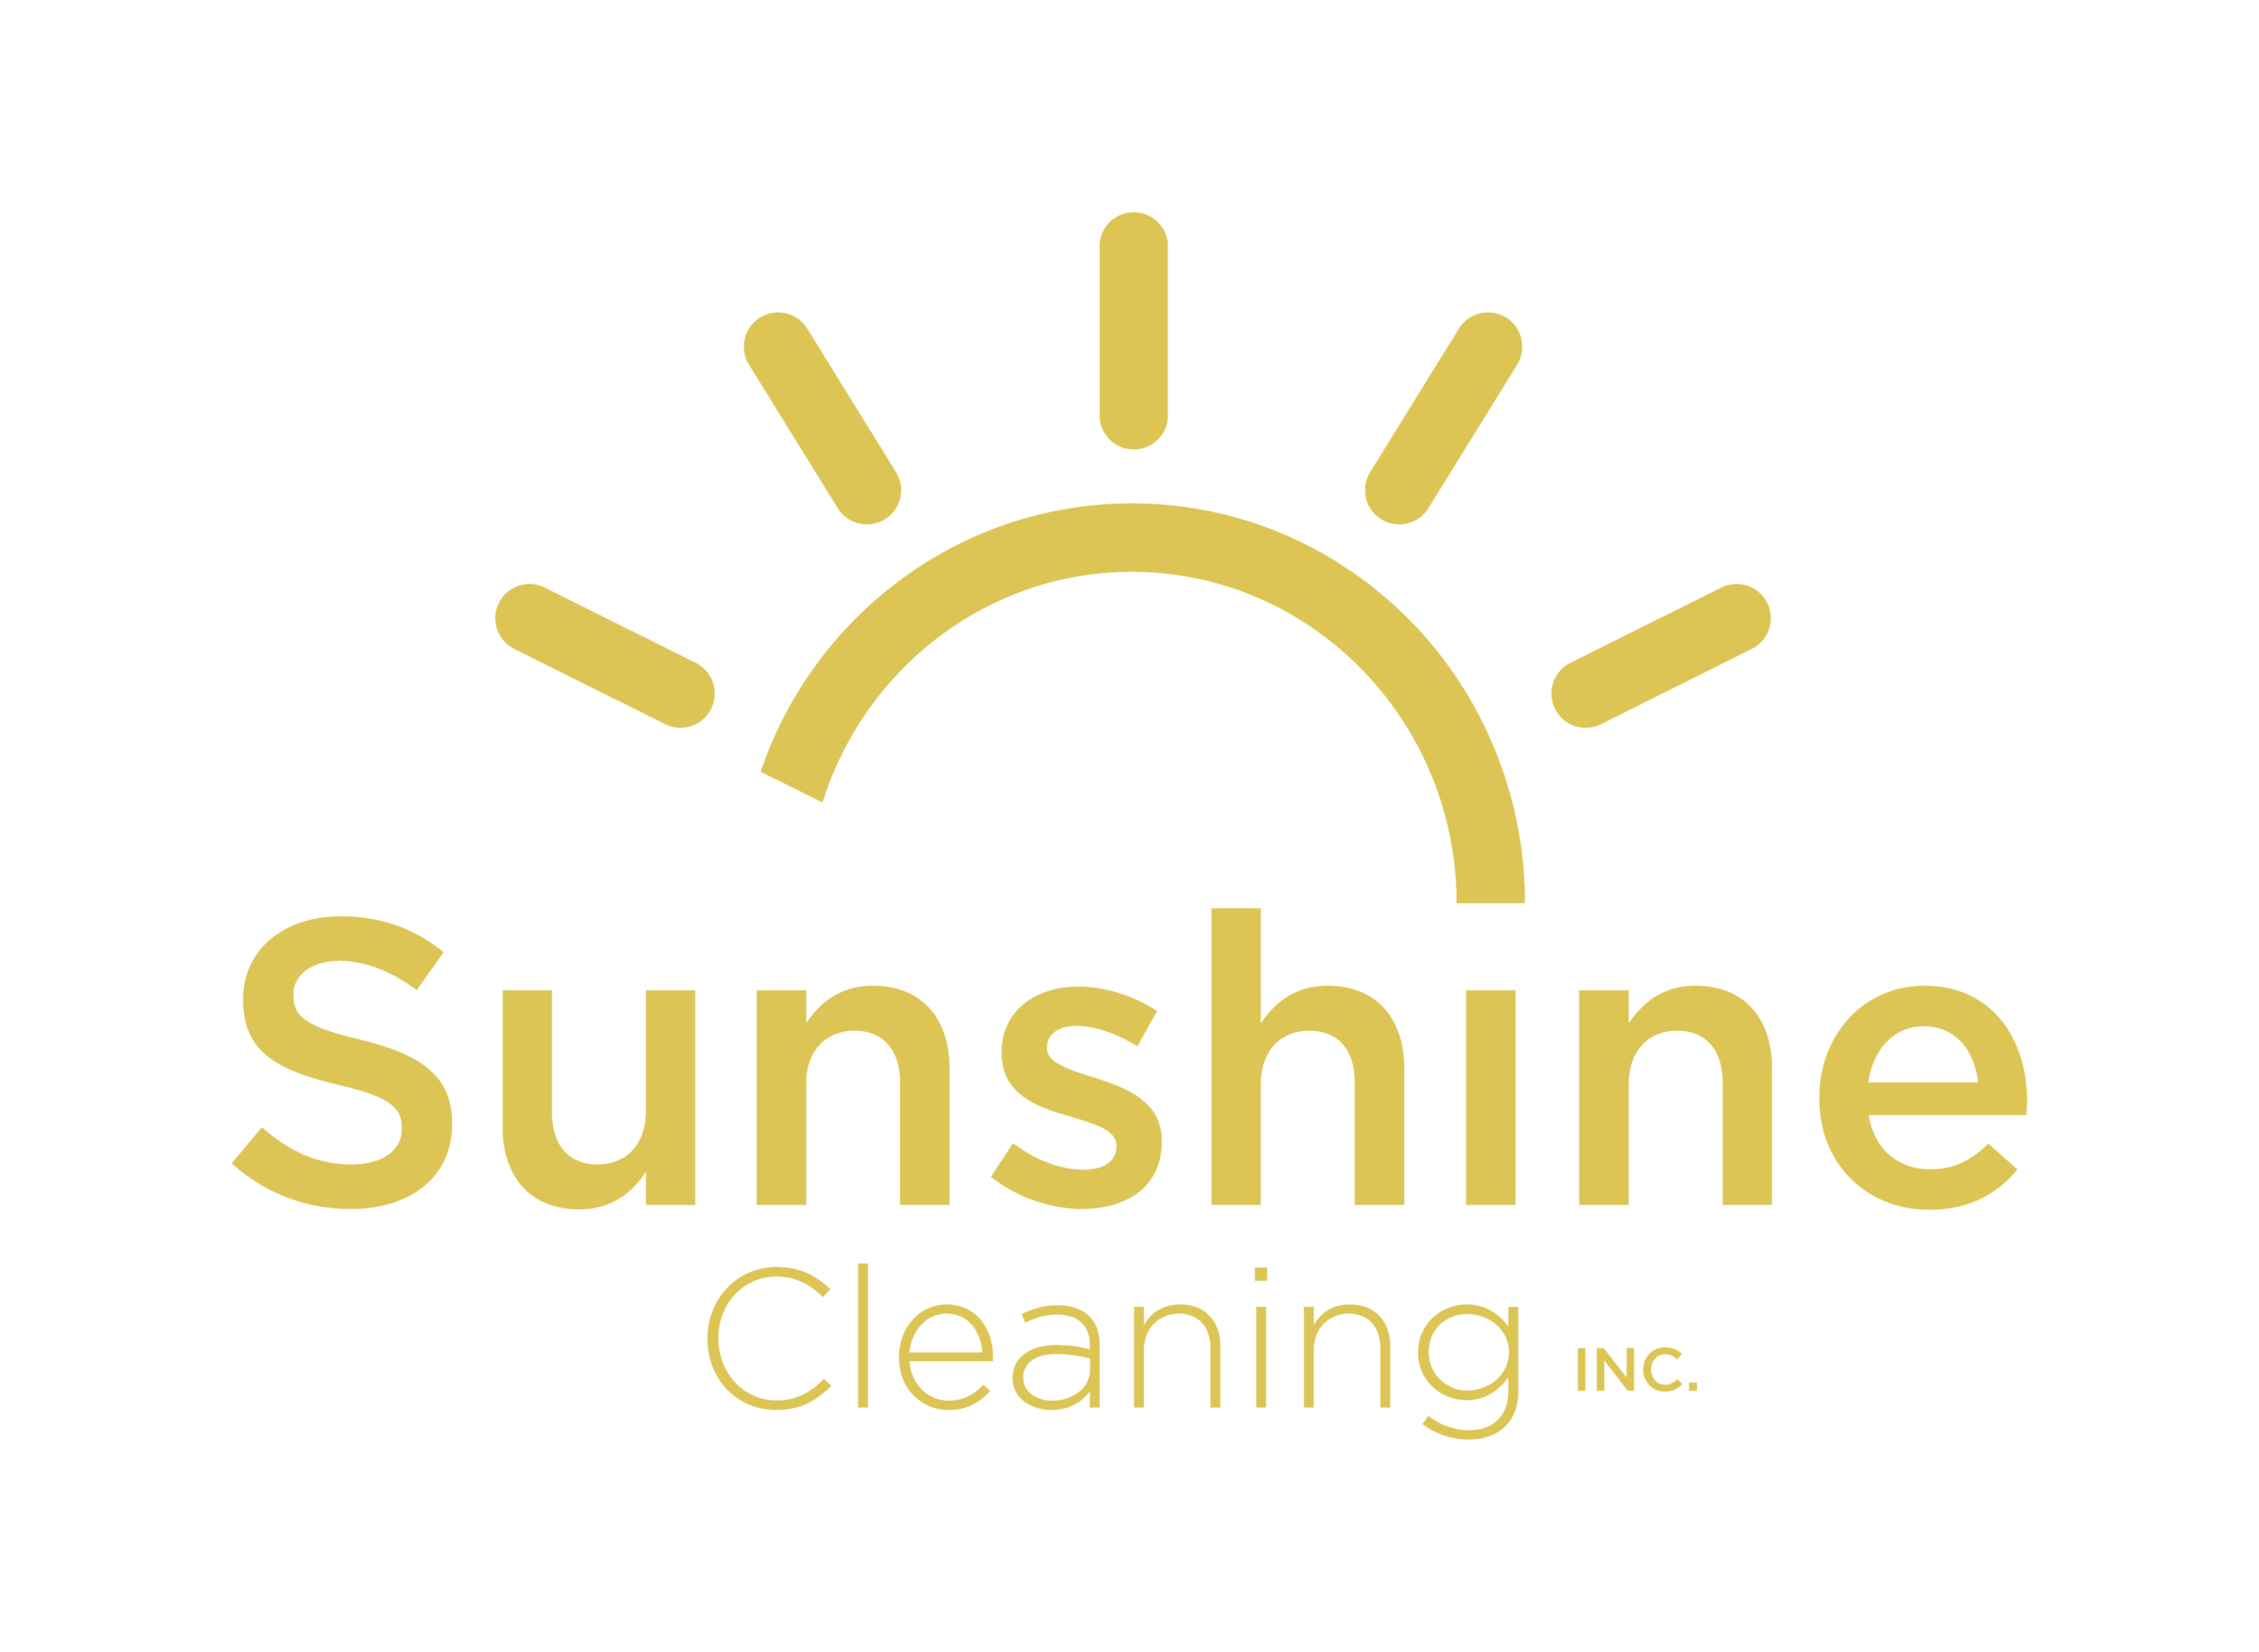 SunshineCleaning_LG_Master_Final-04.png